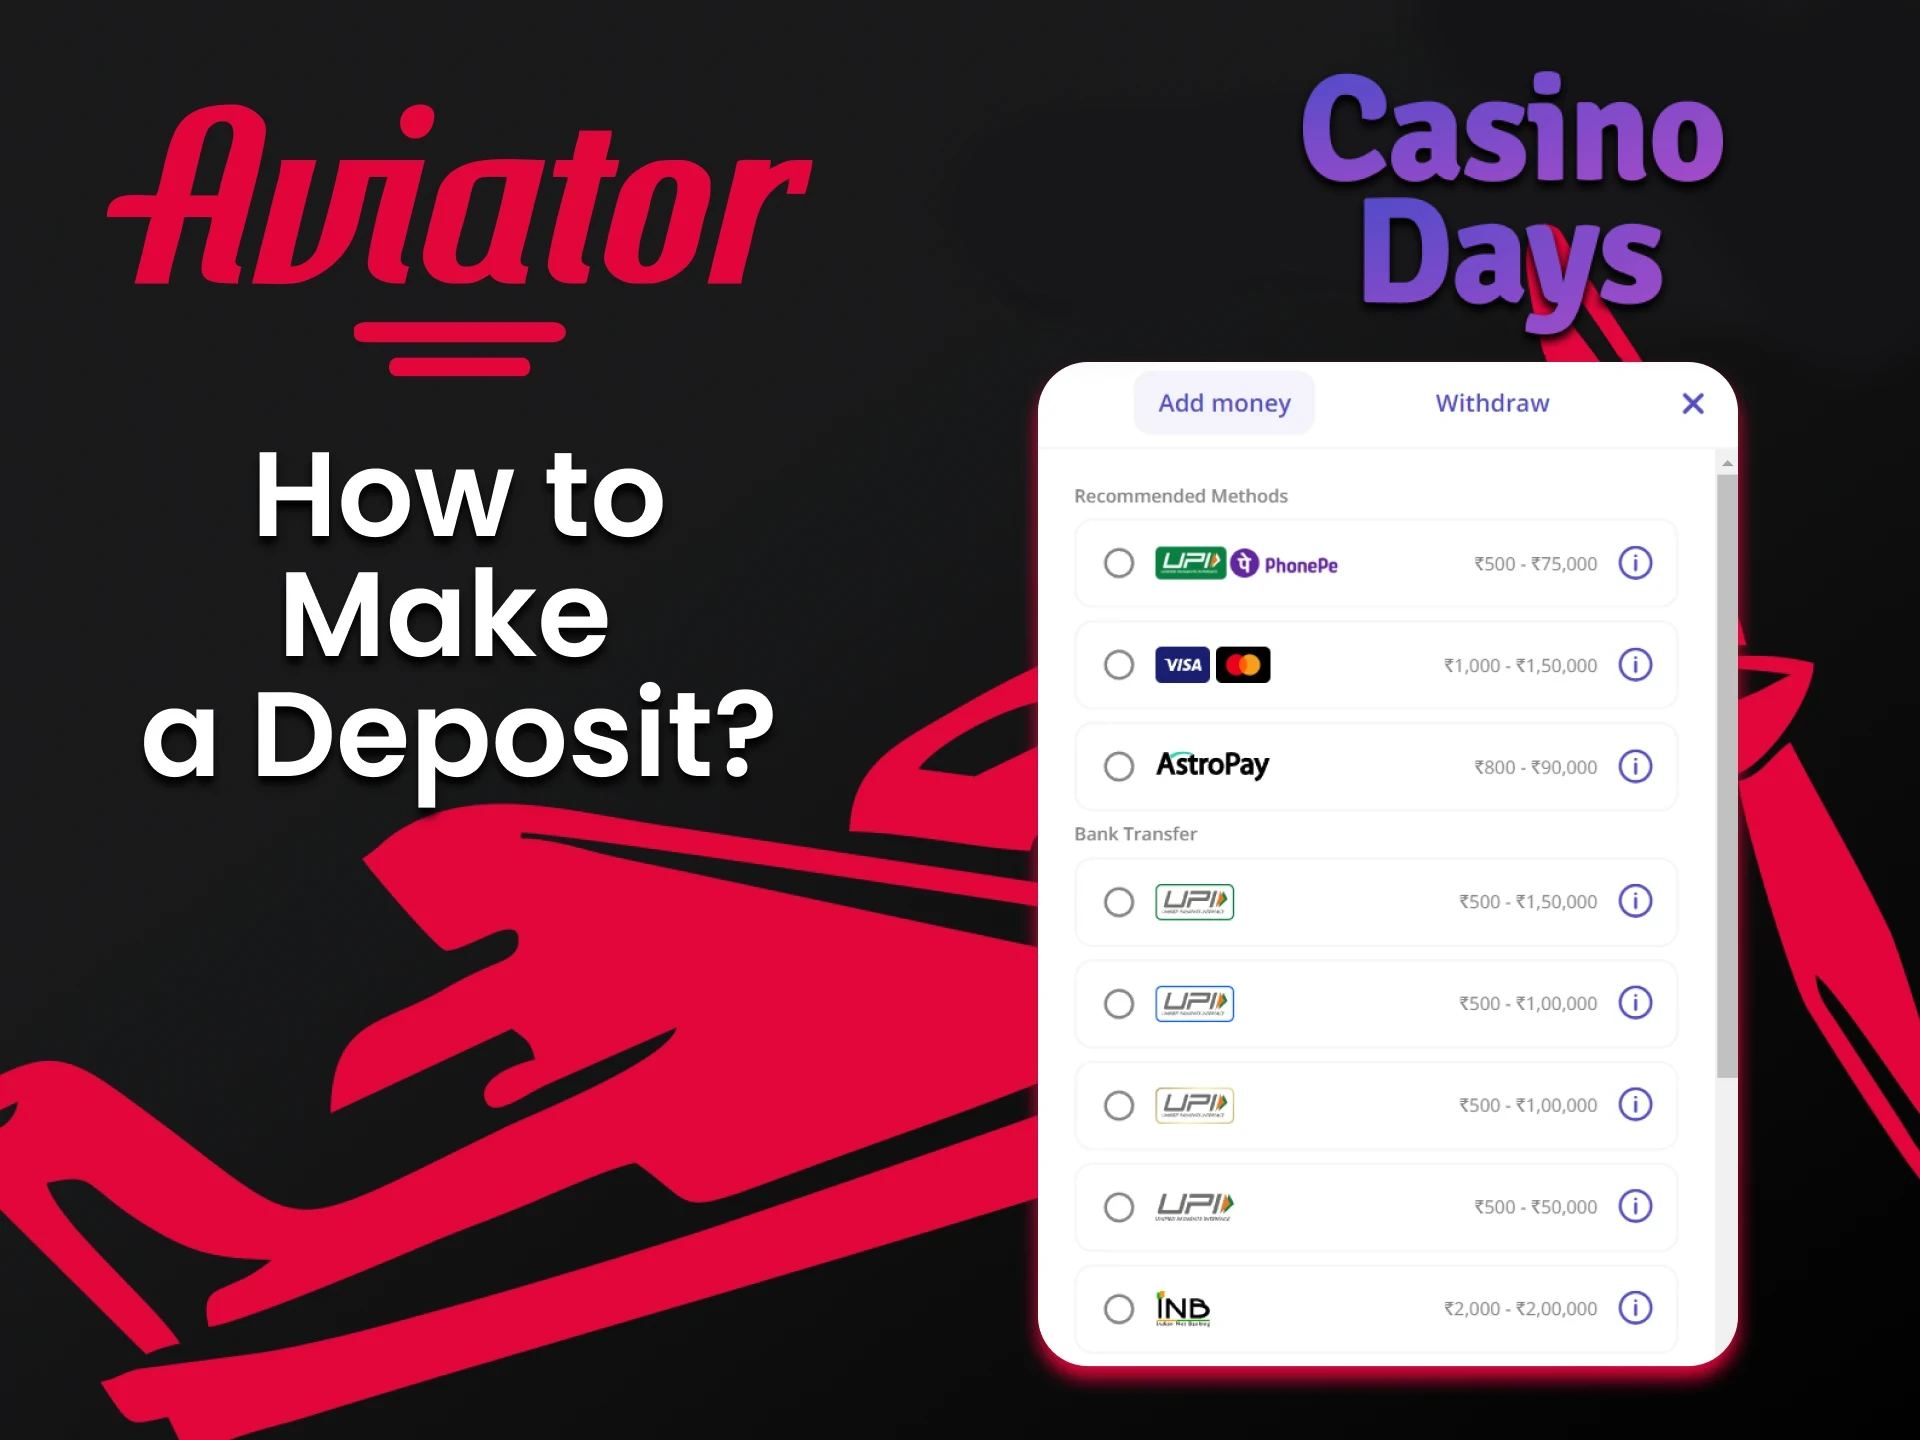 We will tell you how to top up funds for Aviator at Casino Days.